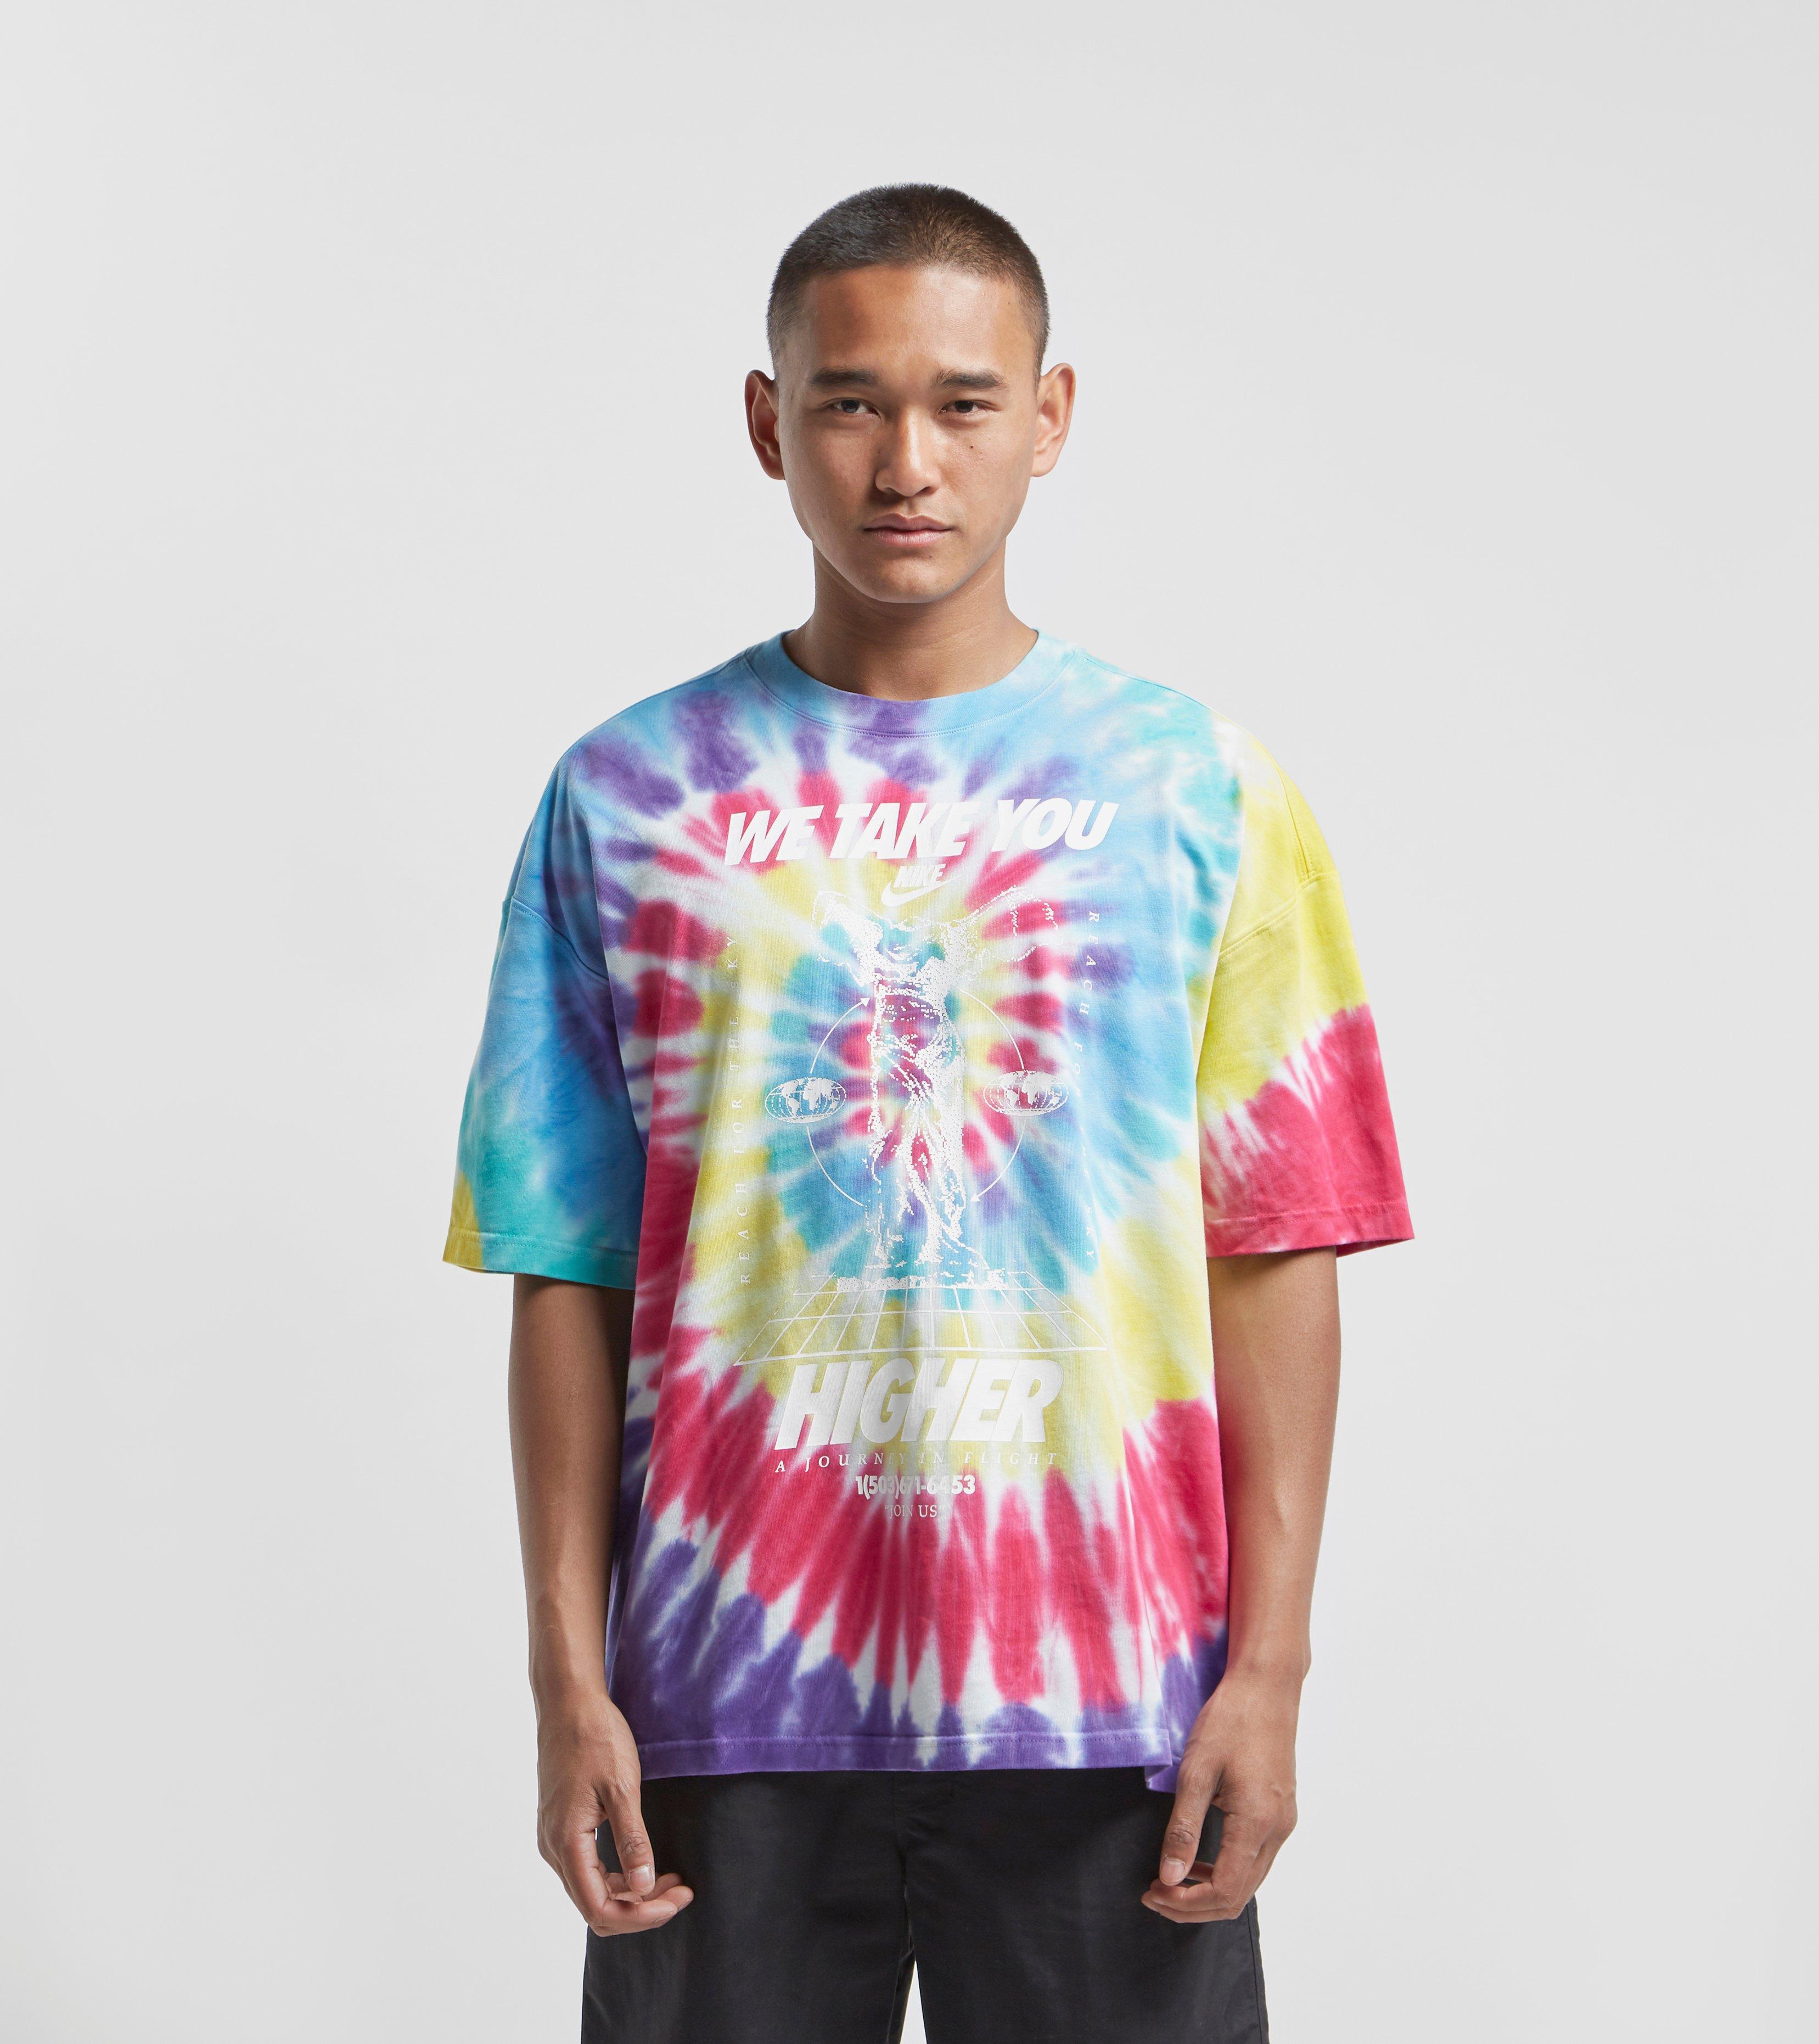 estafador luz de sol Similar size? on Twitter: "The @Nike Tie Dye Higher T-Shirt. Available online and  in selected size? stores - #sizeHQ Shop now: https://t.co/vTn8wywC7N  https://t.co/lZ9b88MylS" / Twitter